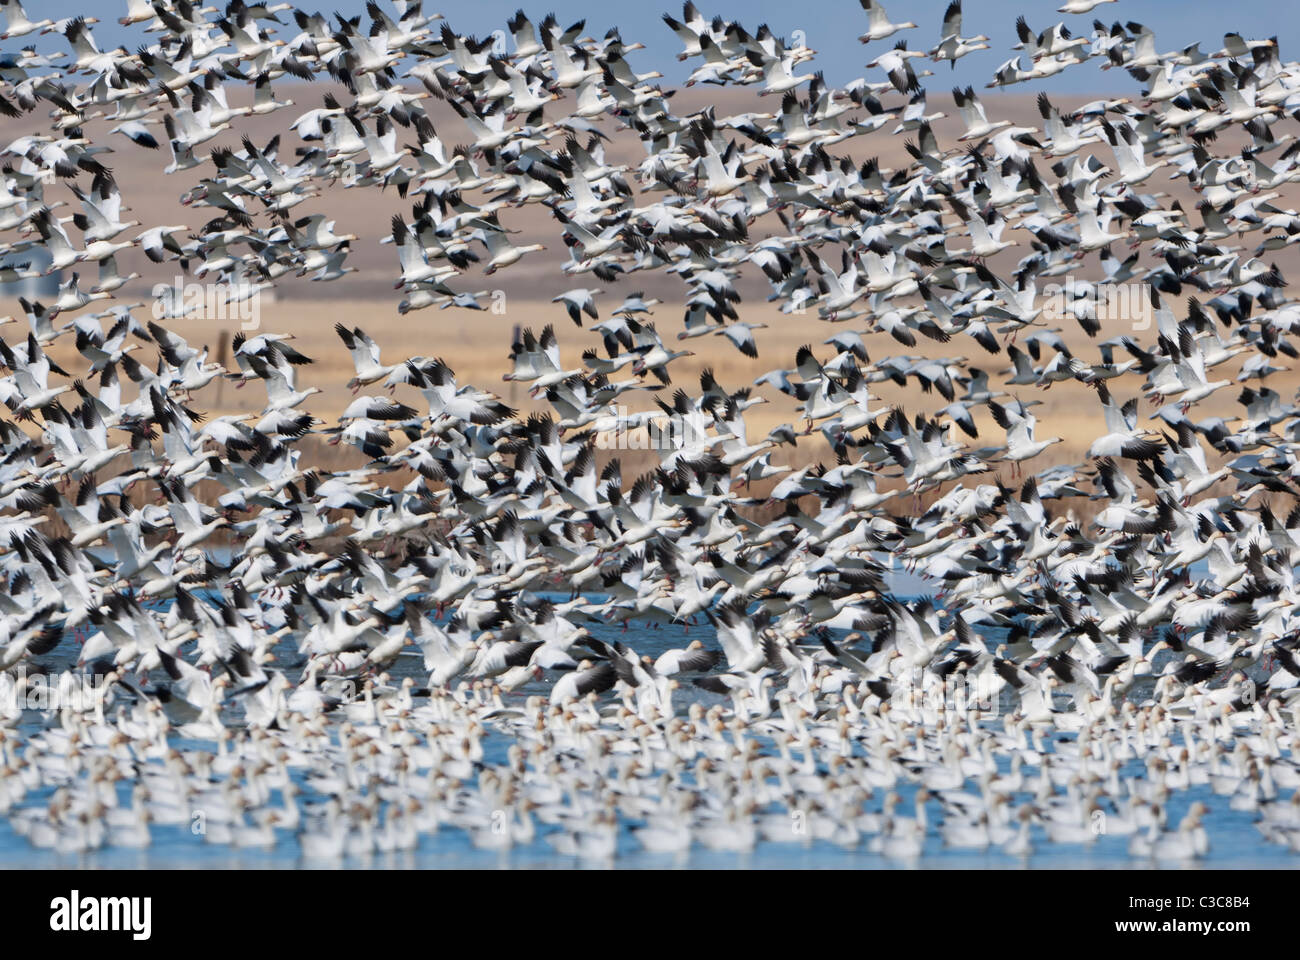 Snow Geese lift off from a Montana lake during the Spring migration, Central Montana Stock Photo